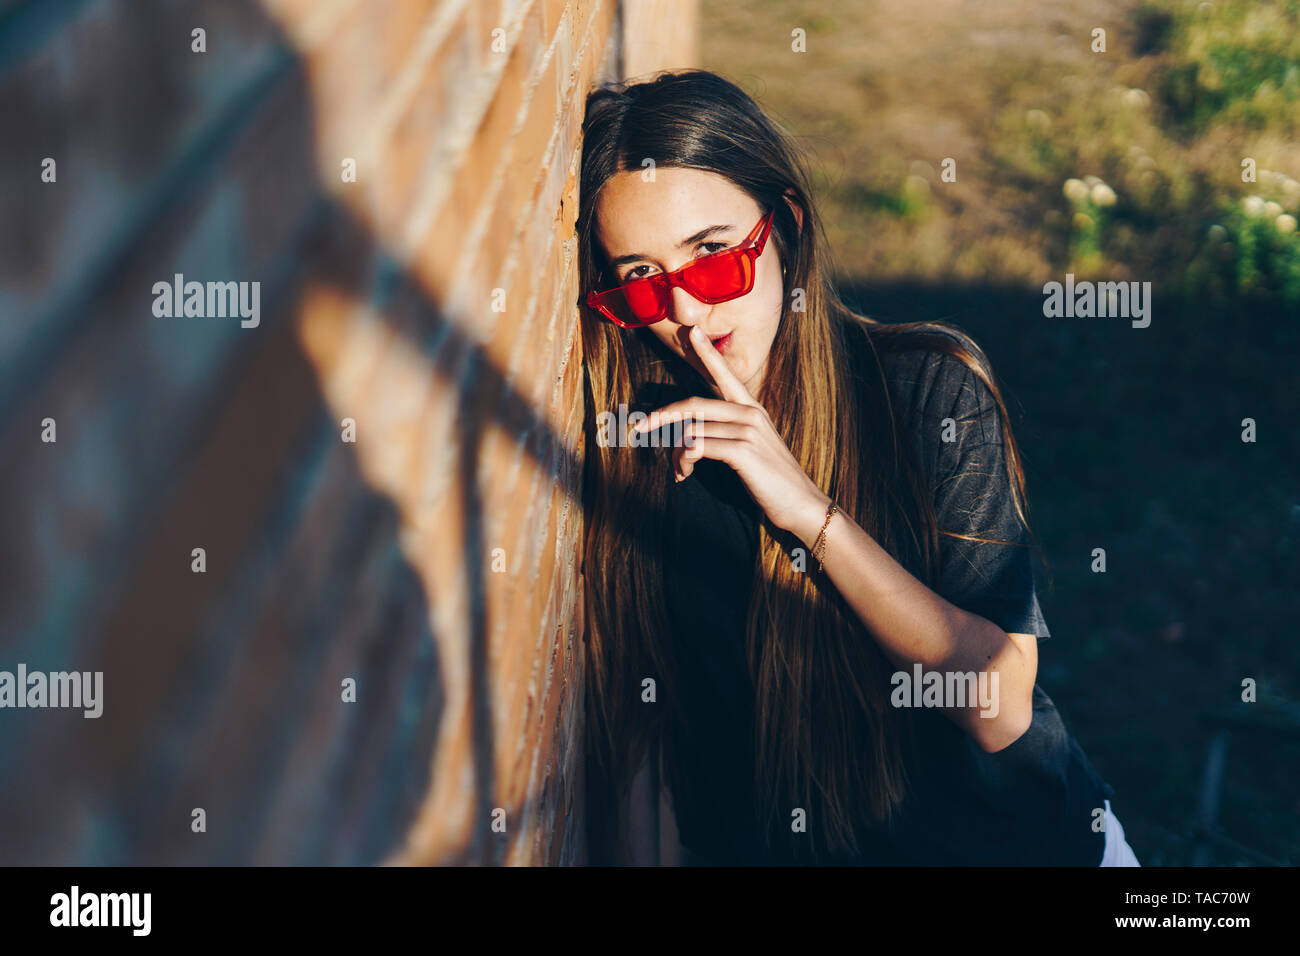 Spain, portrait of a teenage girl with finger on mouth Stock Photo